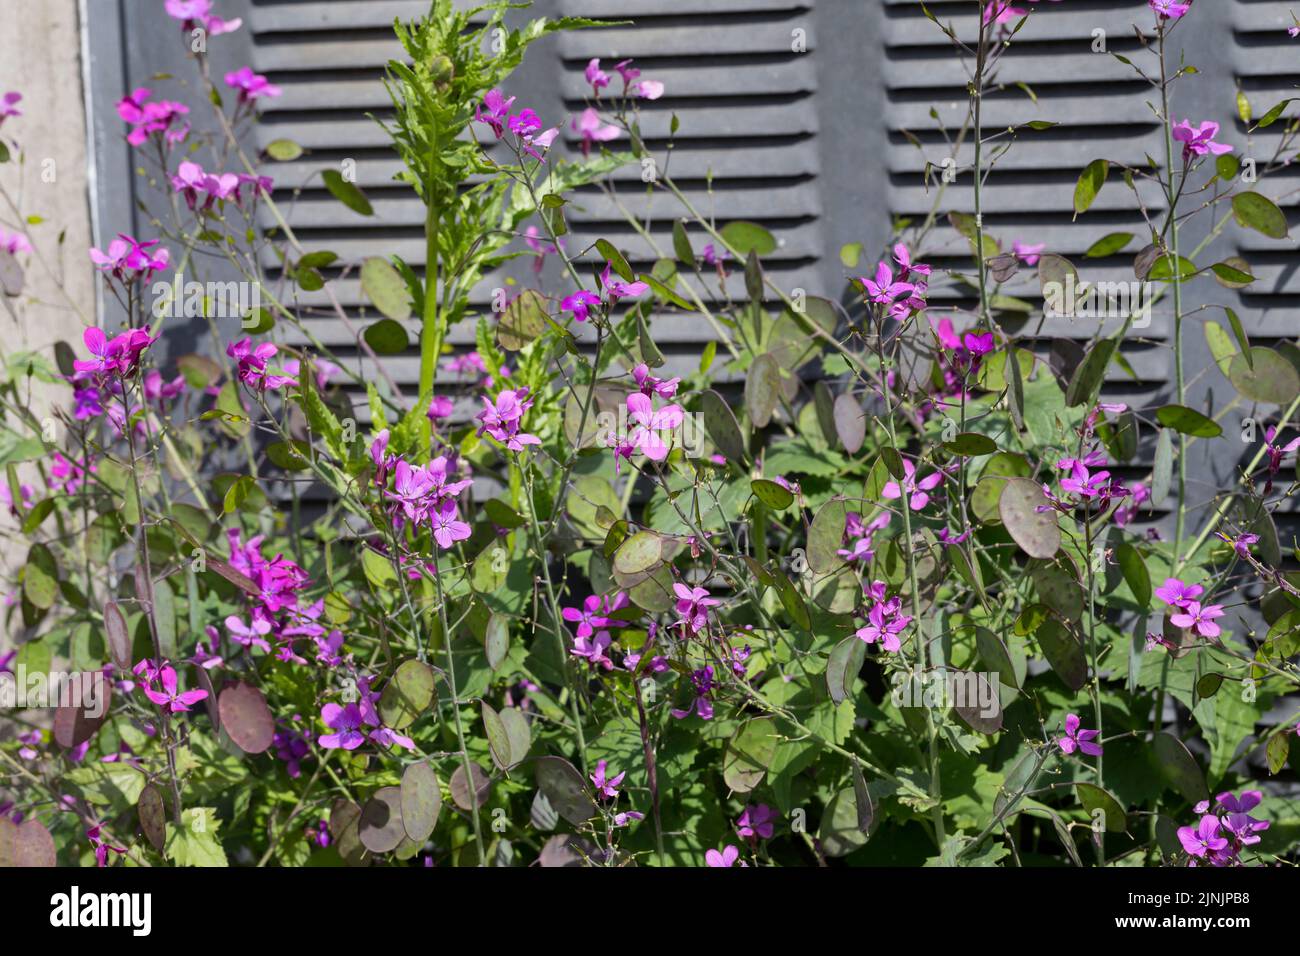 Honesty plant, Annual honesty (Lunaria annua), escaped at a house wall, Germany Stock Photo